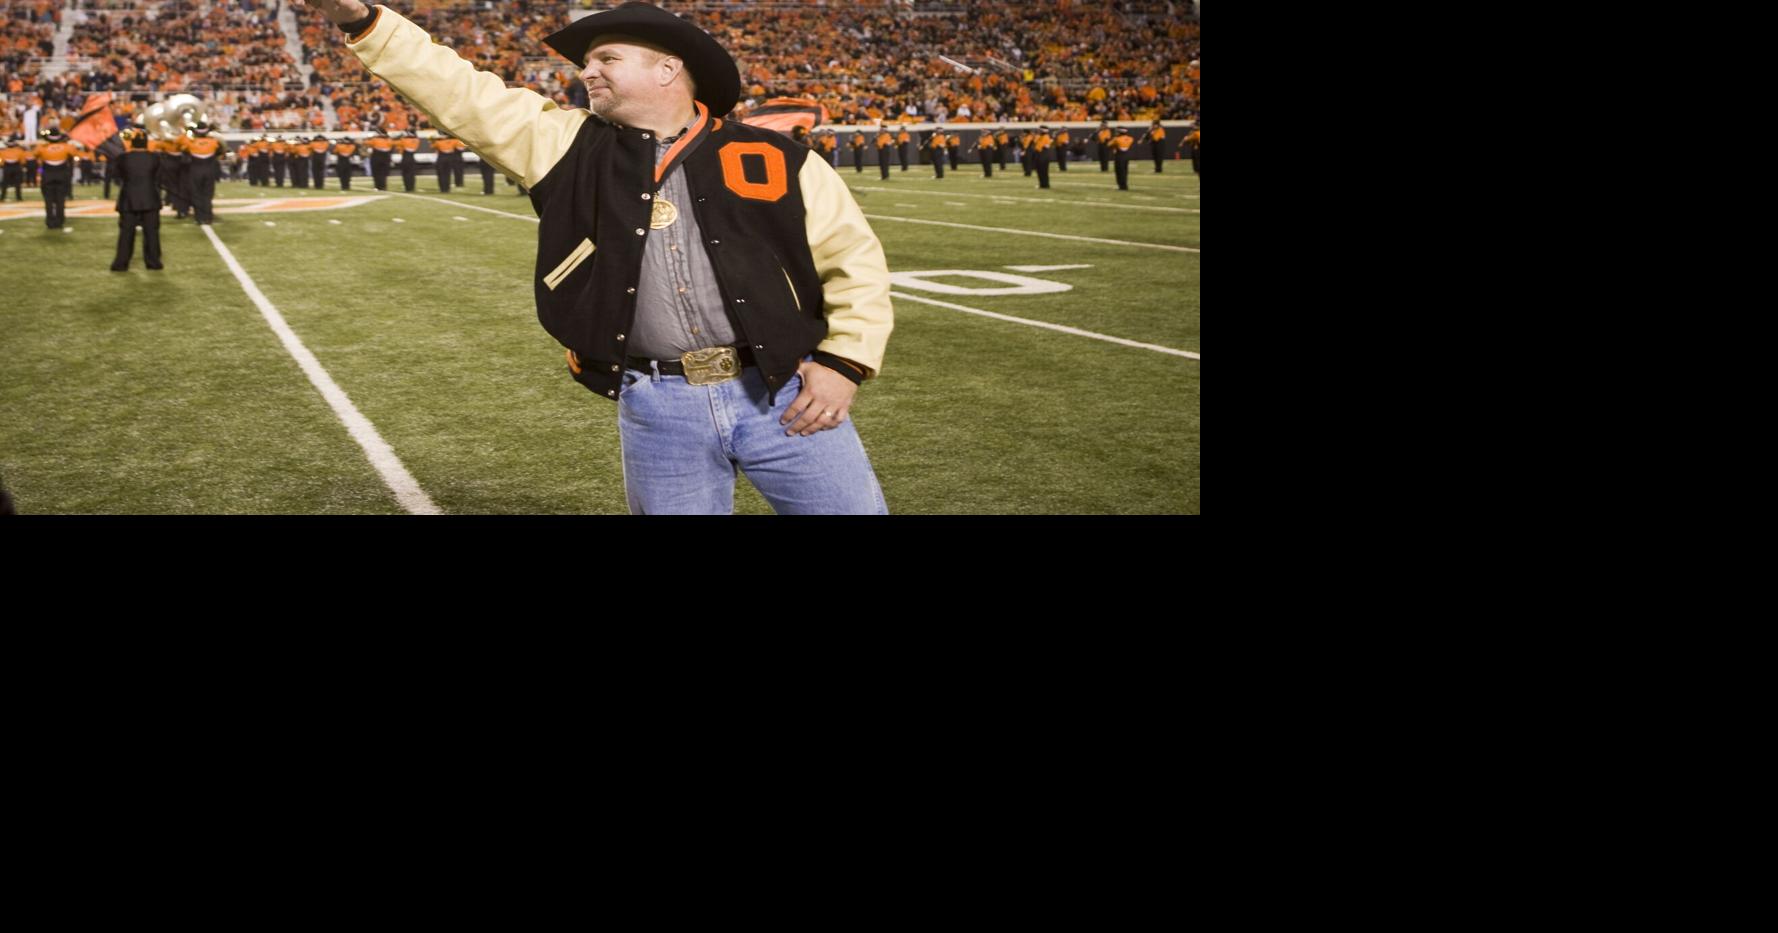 Shaped by the orange: Garth Brooks returns to his alma mater, News